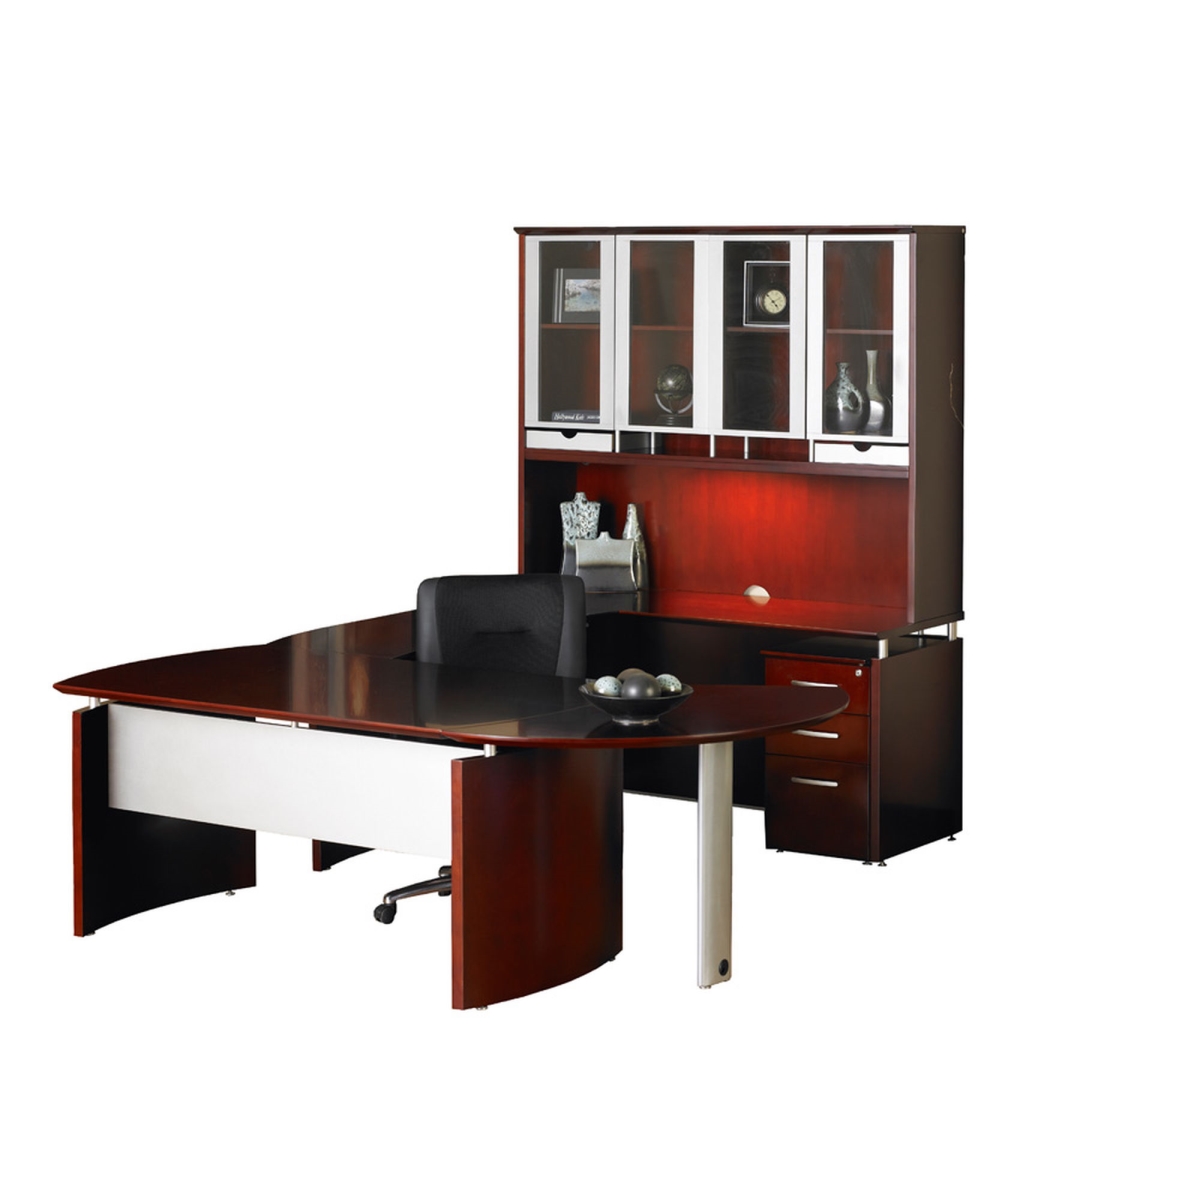 Nt29cry 87 X 108 In. Napoli Suite 29 Right Handed U-shaped Desk With Hutch, Sierra Cherry